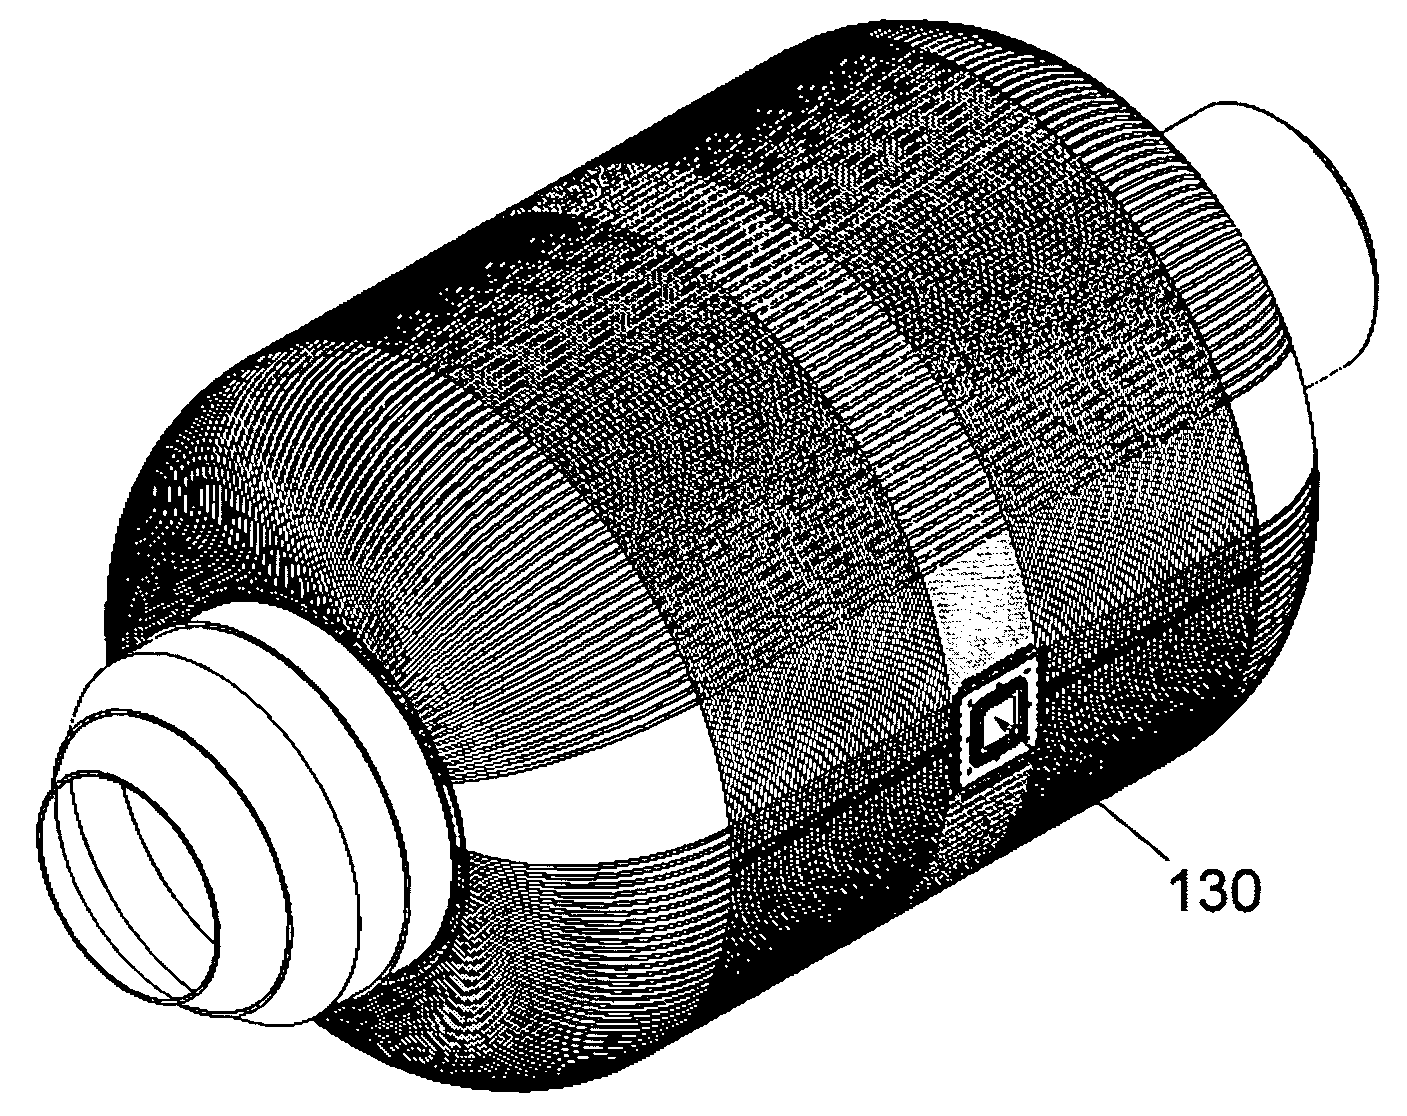 Method for making an opening in the bladder of an inflatable modular structure for receiving a window